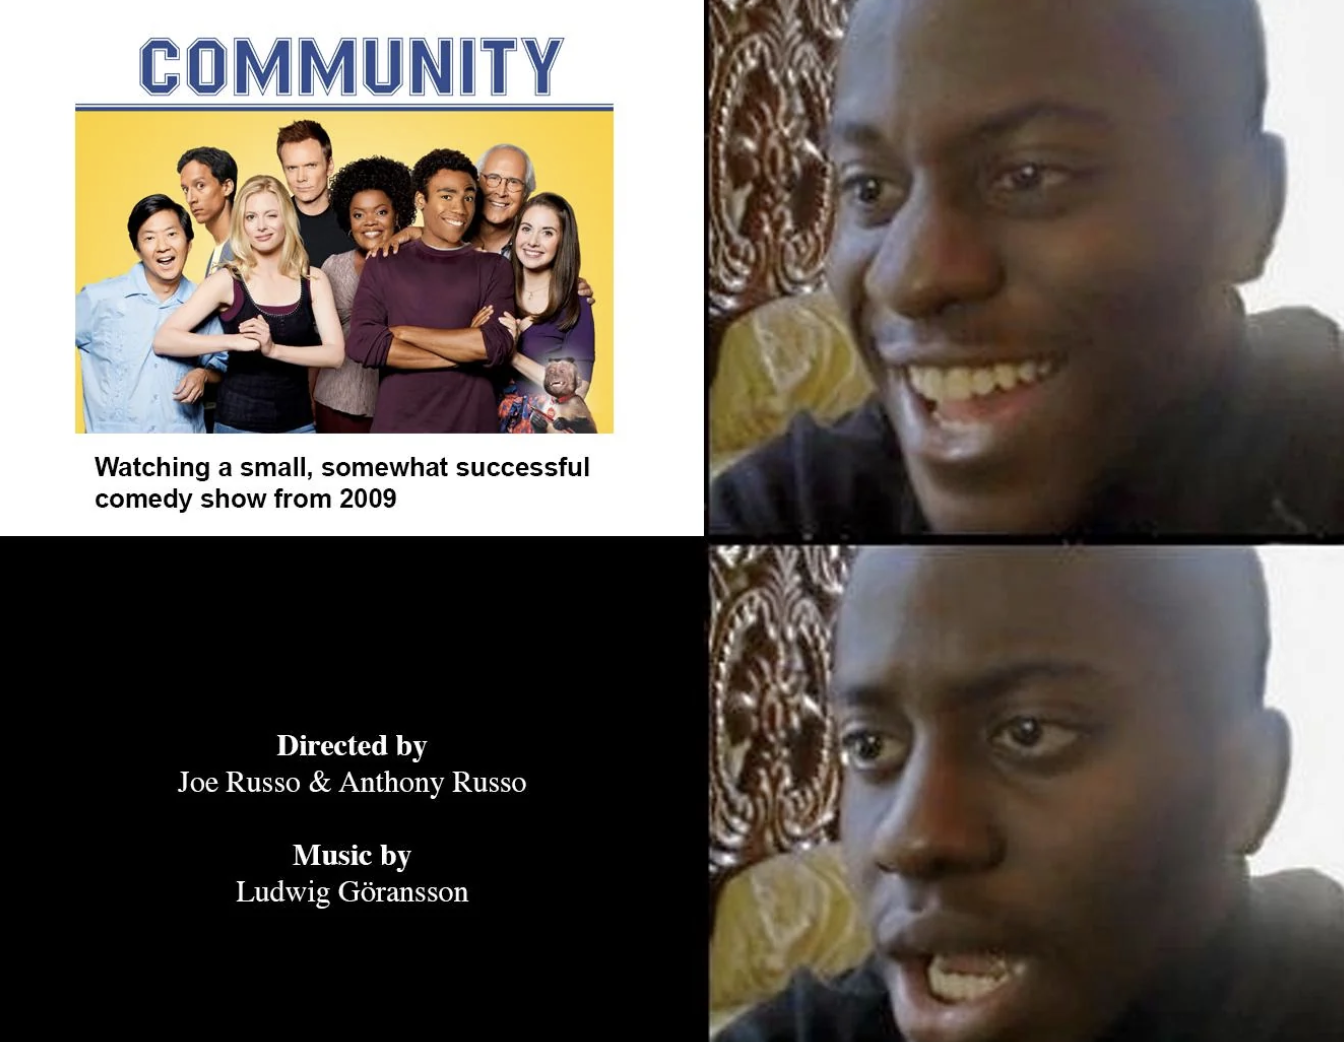 photo caption - Community Watching a small, somewhat successful comedy show from 2009 Directed by Joe Russo & Anthony Russo Music by Ludwig Gransson